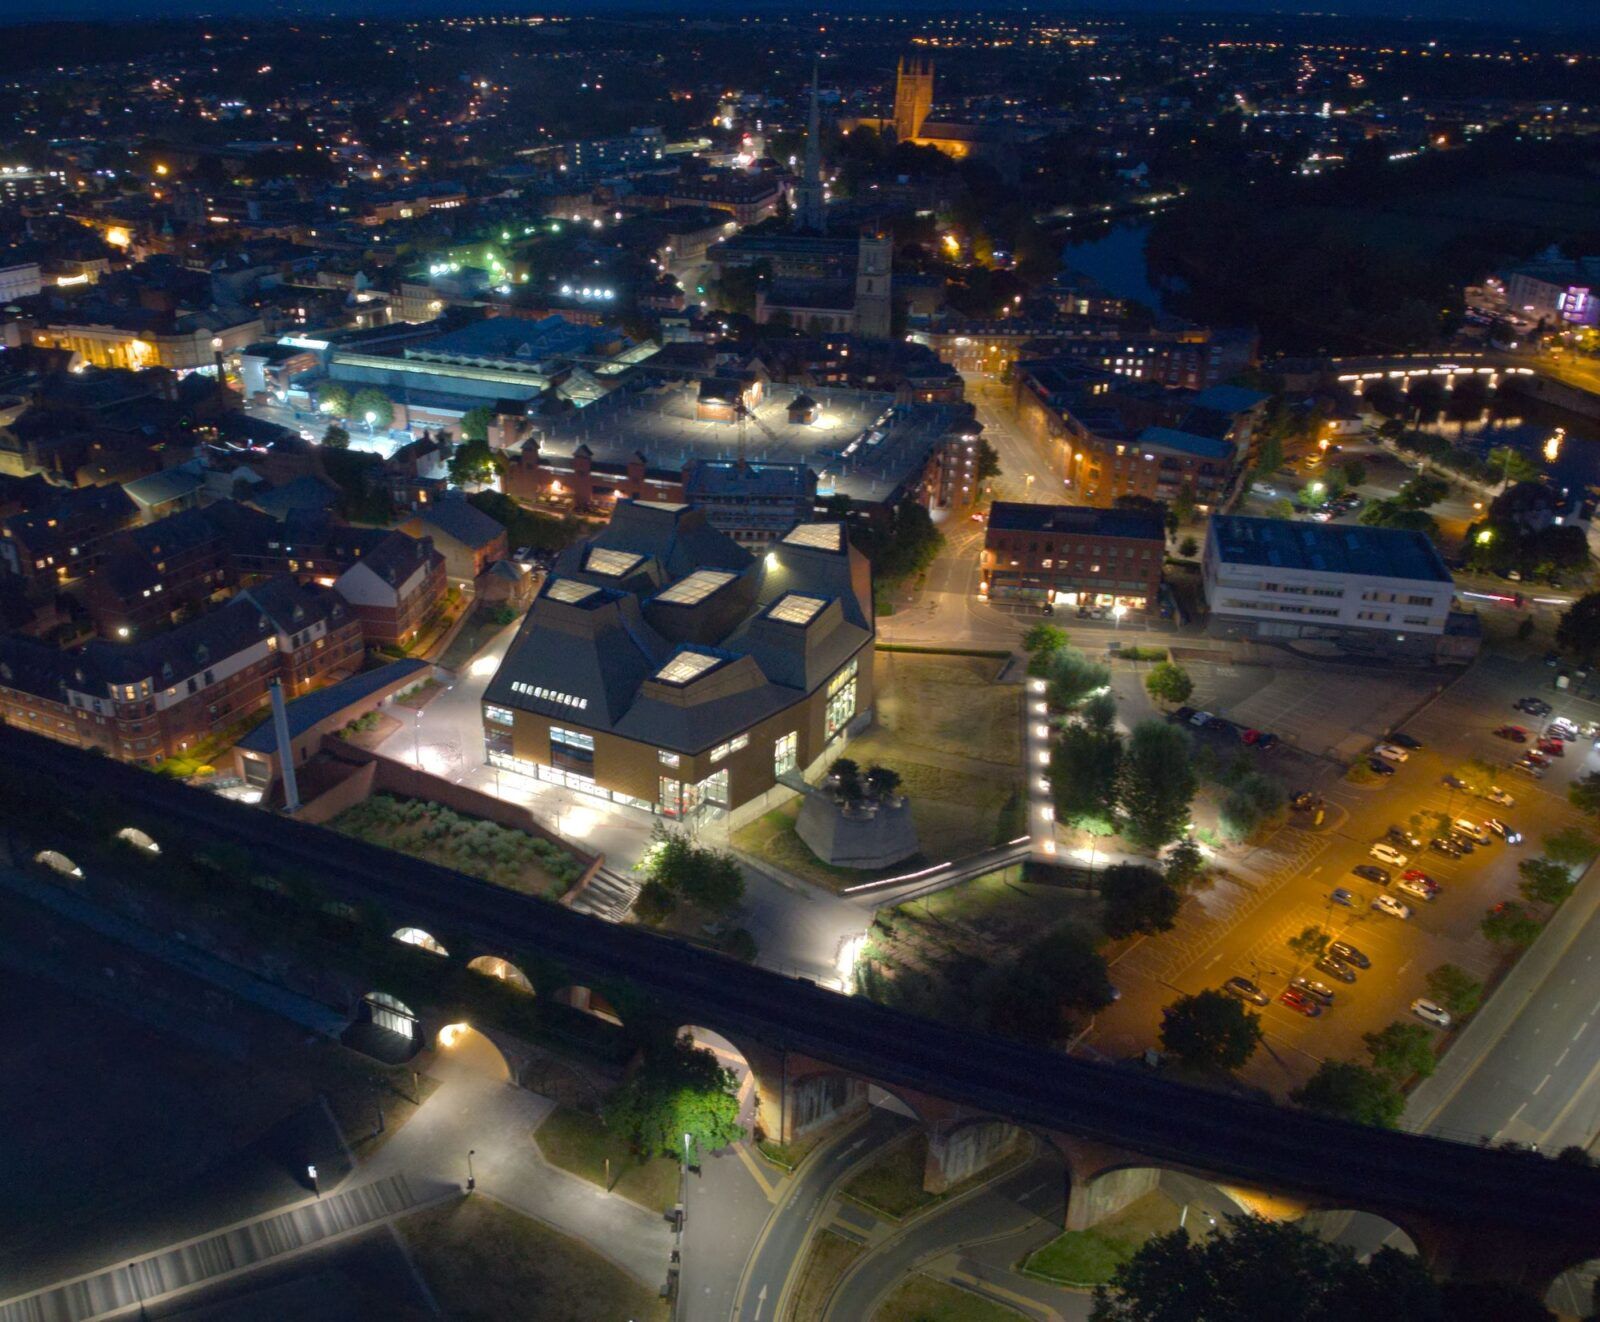 Drone shot of the illuminated Worcester city at night in Massachusetts, United States